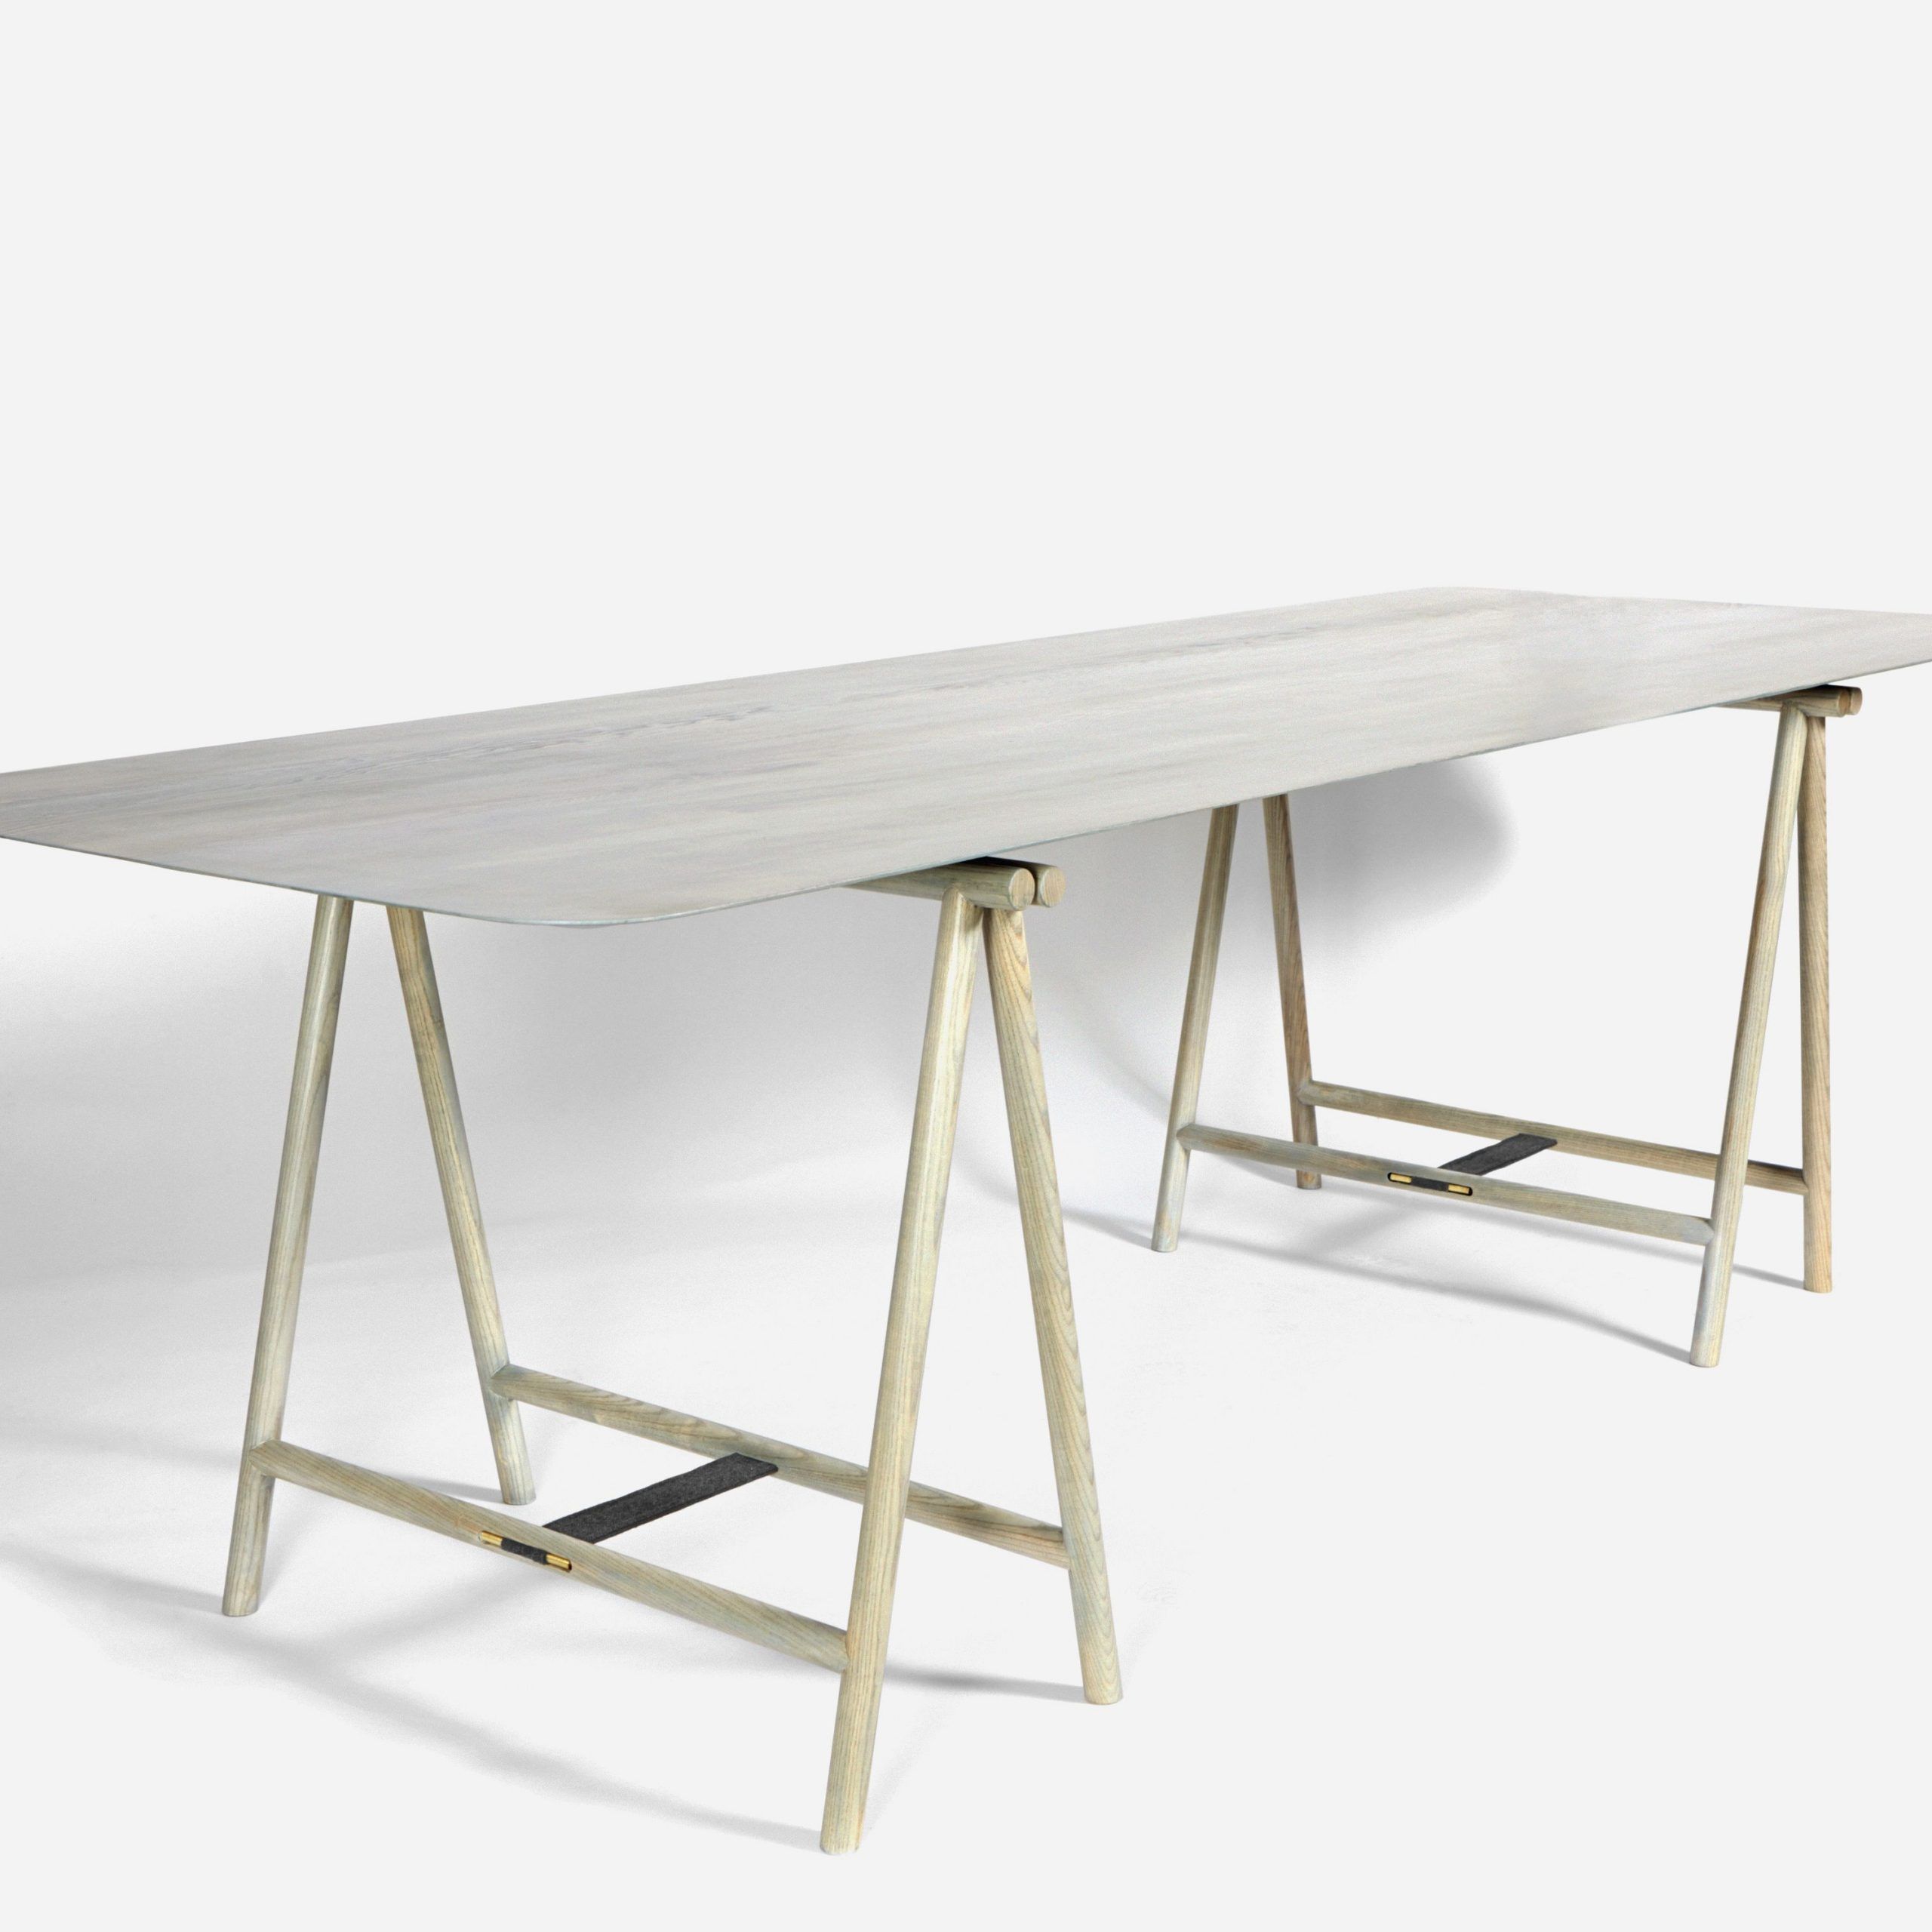 Faye Toogood | Simple •• Design | Trestle Table, Table Intended For 2017 Faye Dining Tables (View 8 of 25)